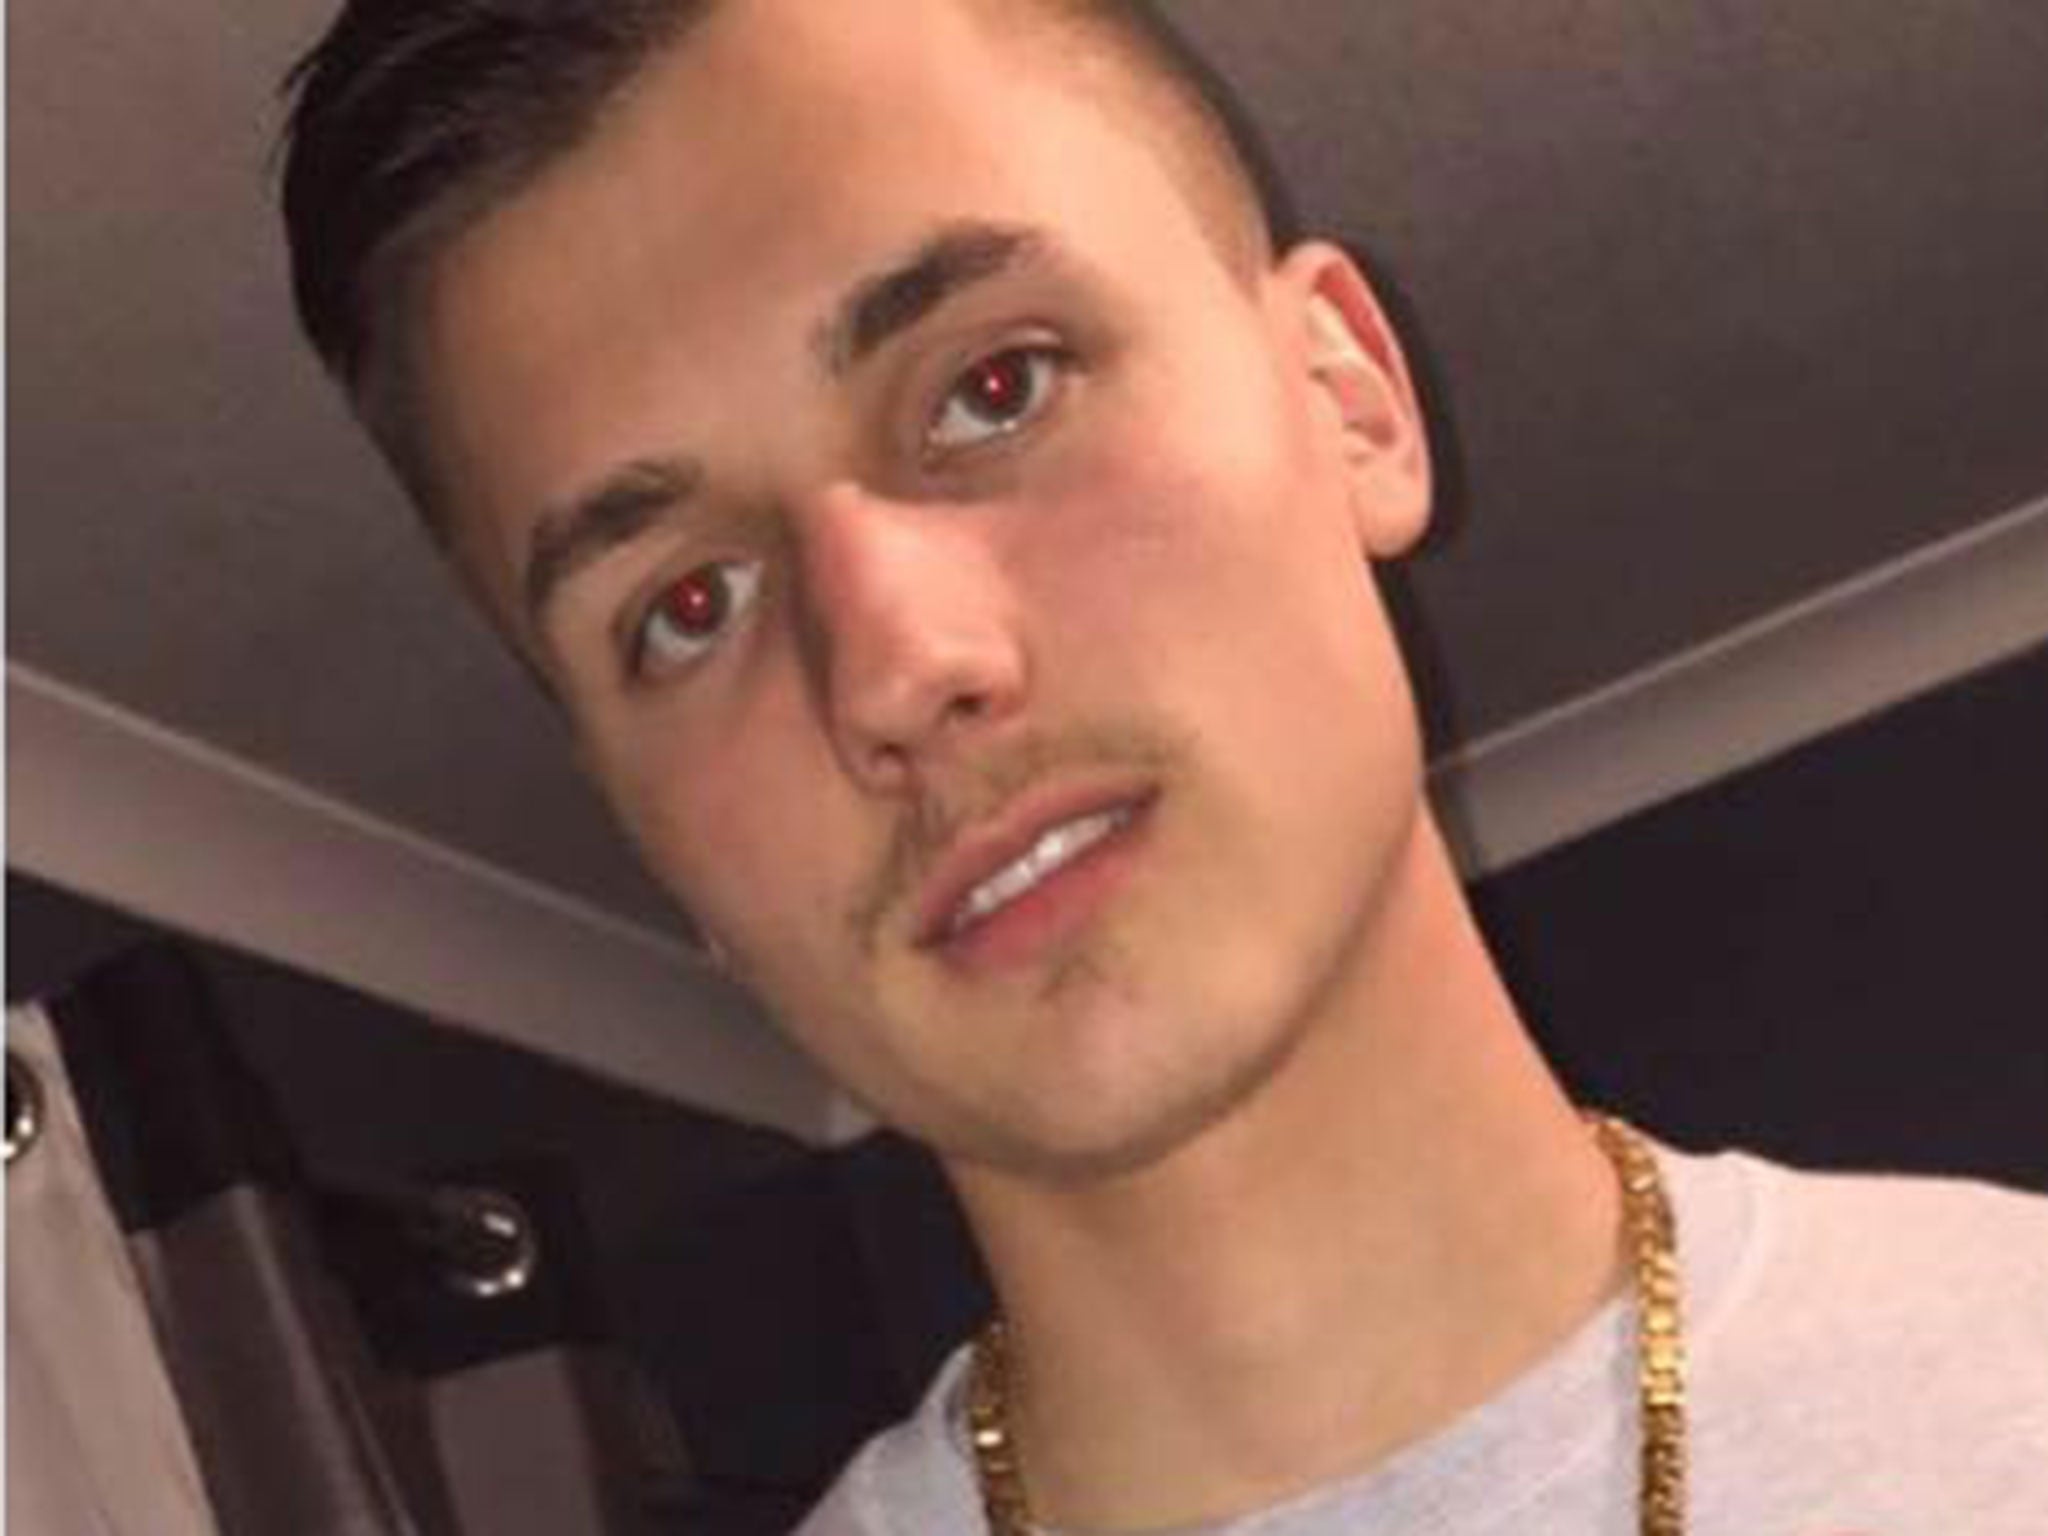 Jason Isaacs, 18, was killed in an unprovoked stabbing attack by perpetrators riding mopeds in Northolt